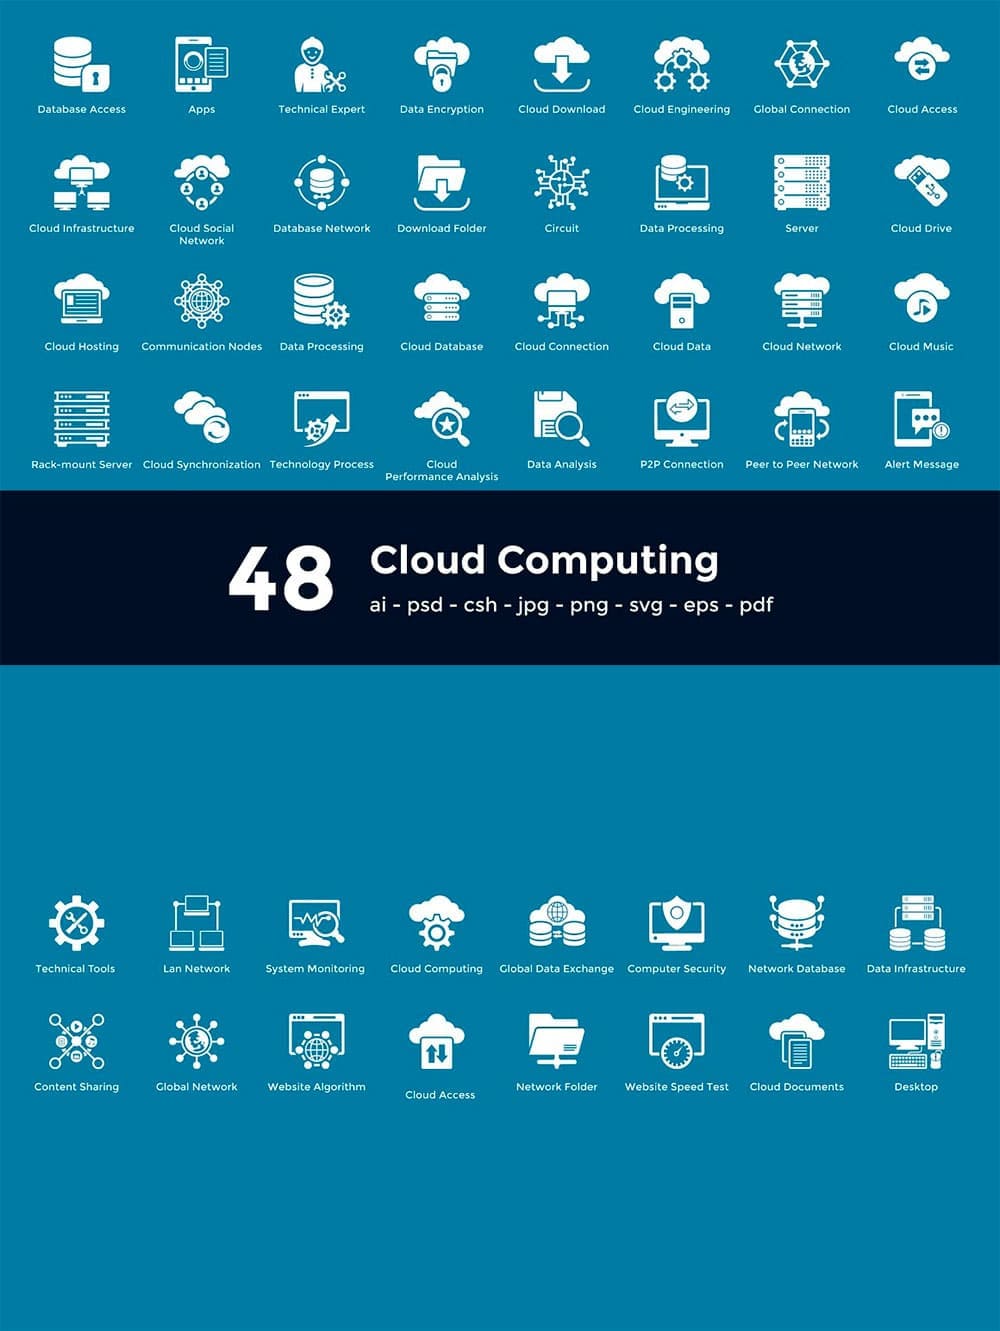 48 cloud computing icons, picture for pinterest.